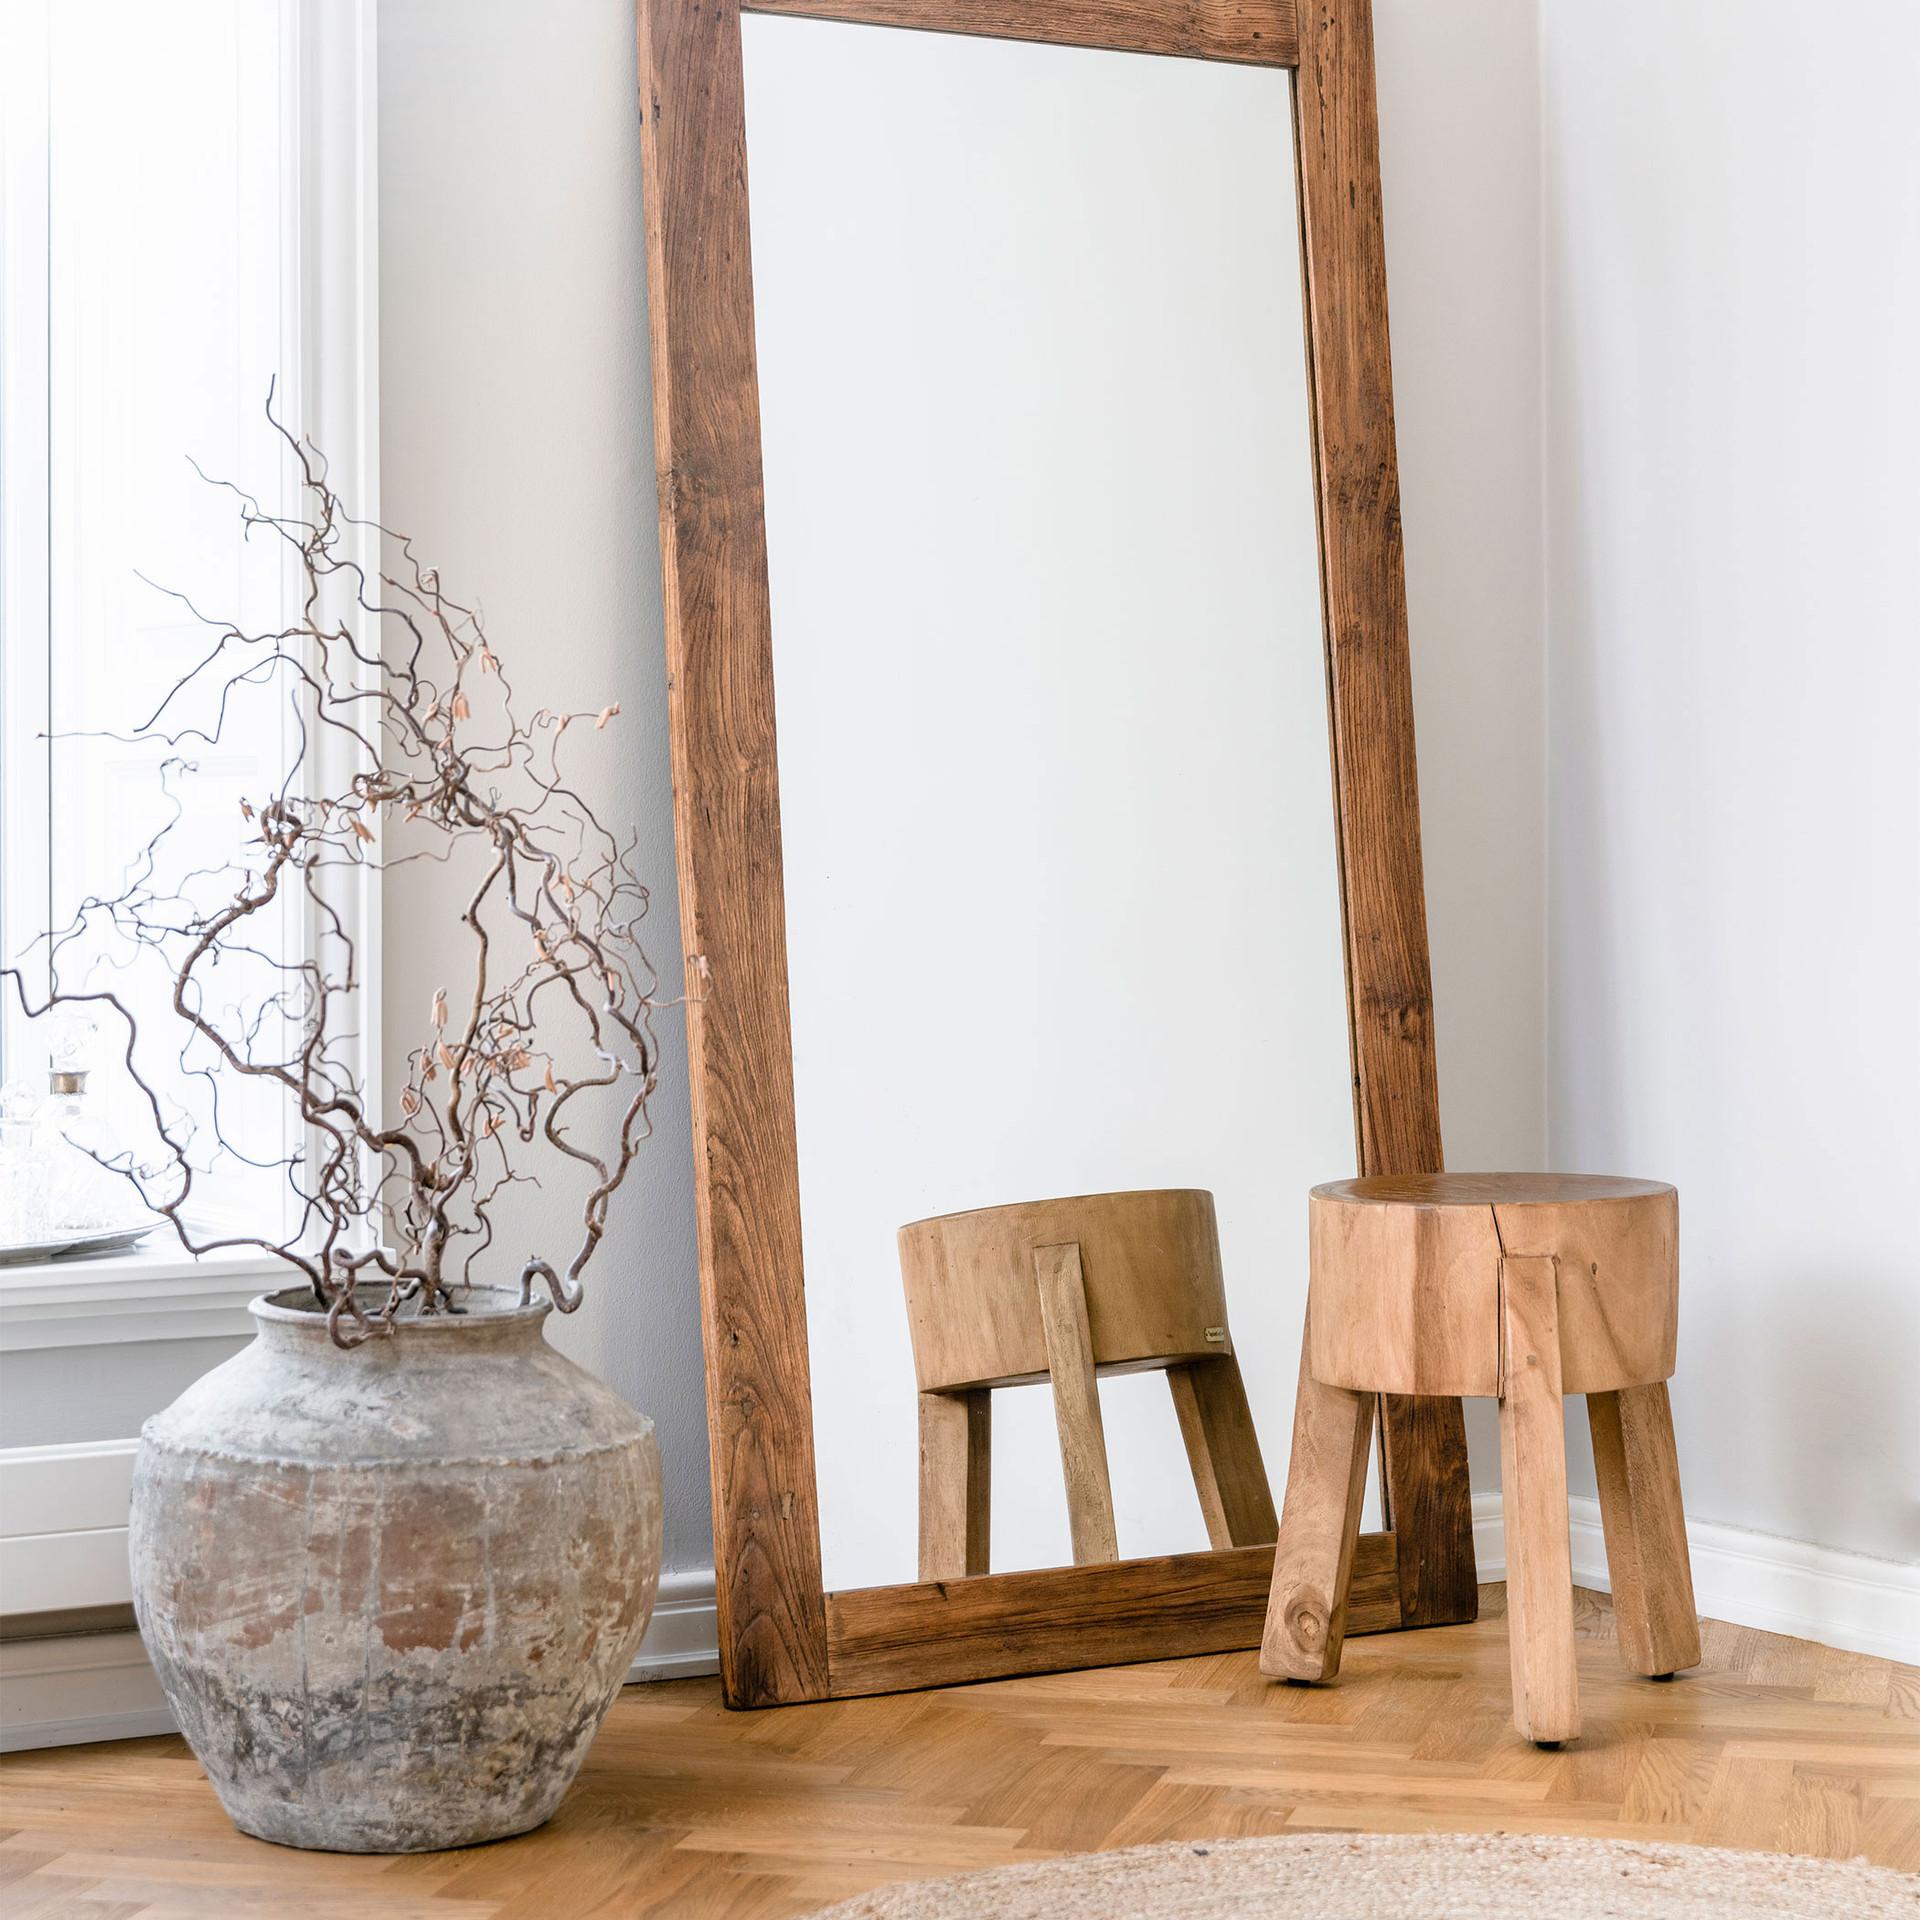 The Roger Stool's strength and simplicity highlight the beautiful suar wood used to craft it. The stool is heavy and is not easily knocked over. The Roger stool is very versatile and fits well as a nightstand table or in the living room as an extra